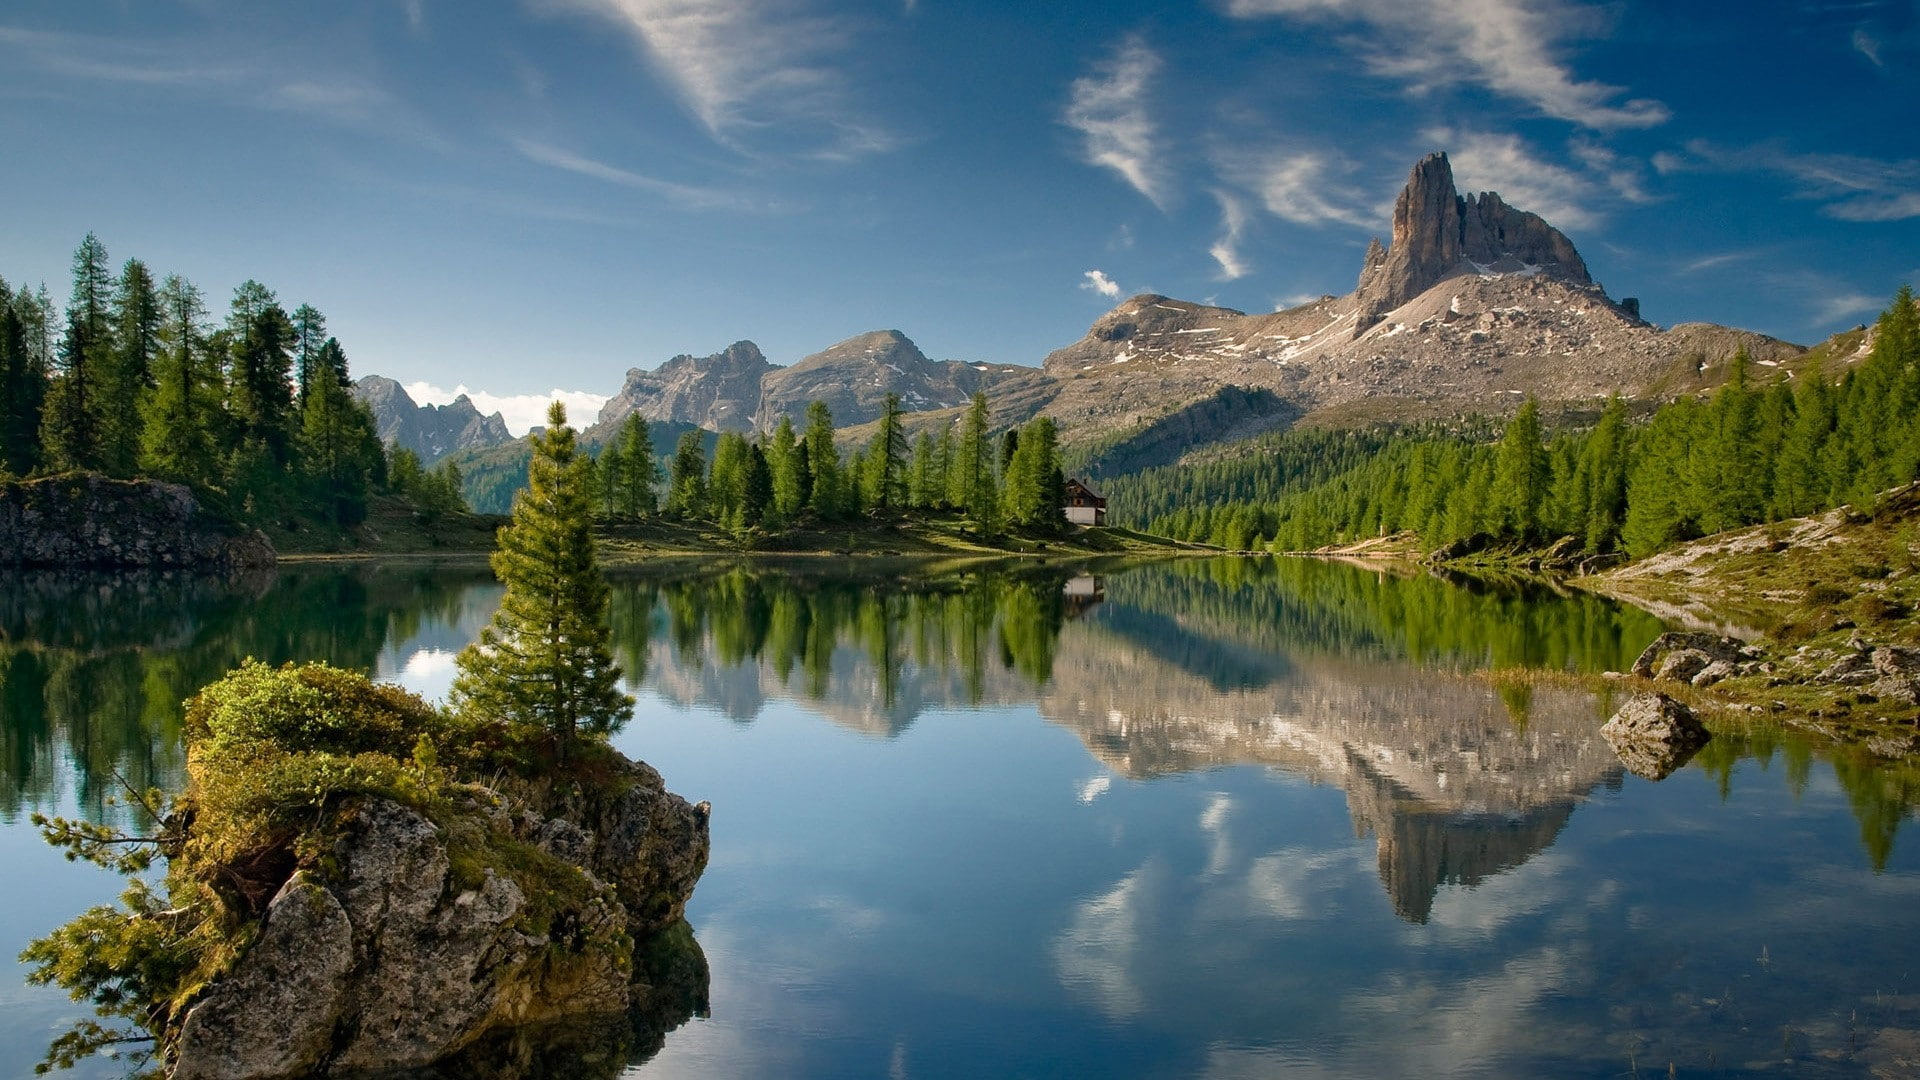 clear calm body of water surrounded by trees, lake, rock, mountains